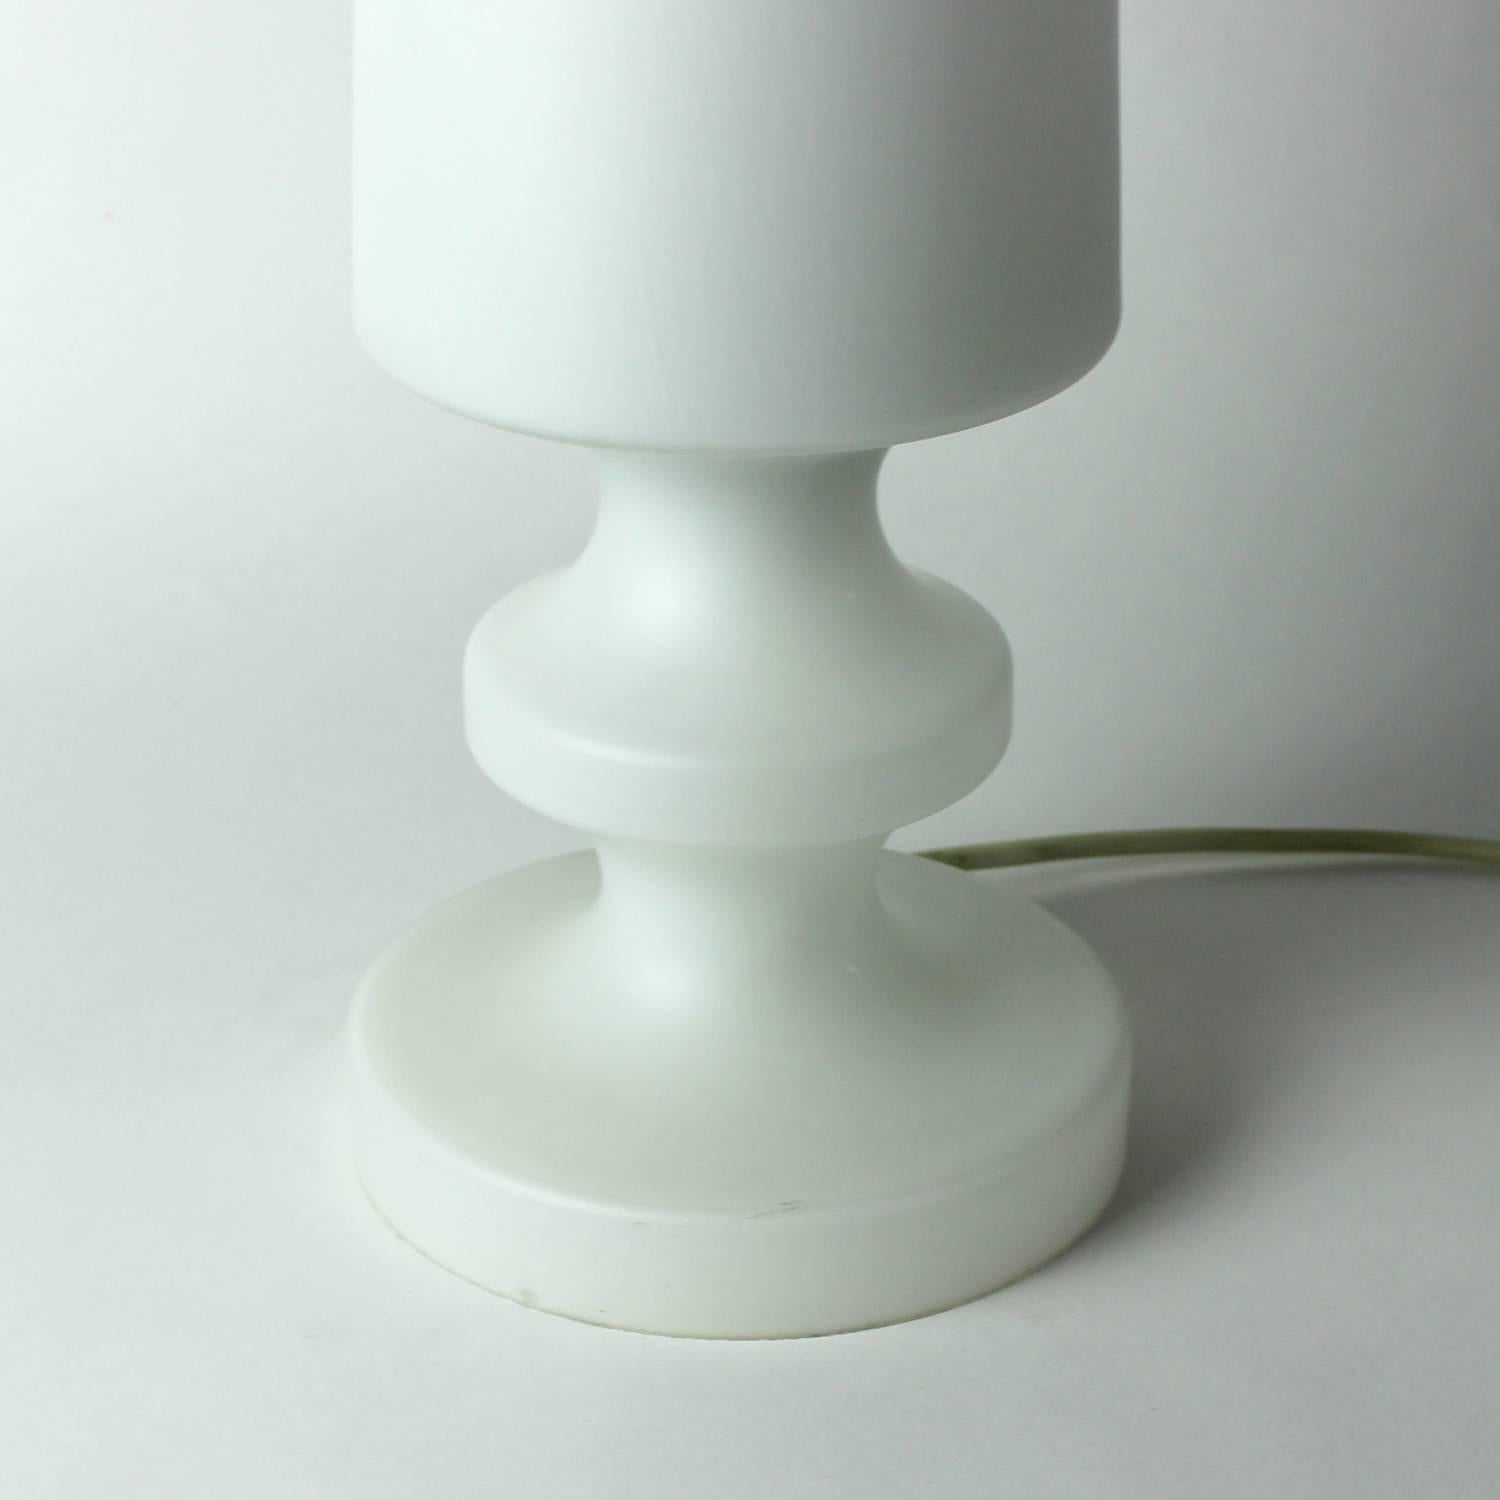 Rare White Glass Table Lamp by Ivan Jakes, Osvetlovaci Sklo, Czechoslovakia 1970 In Good Condition For Sale In Zohor, SK